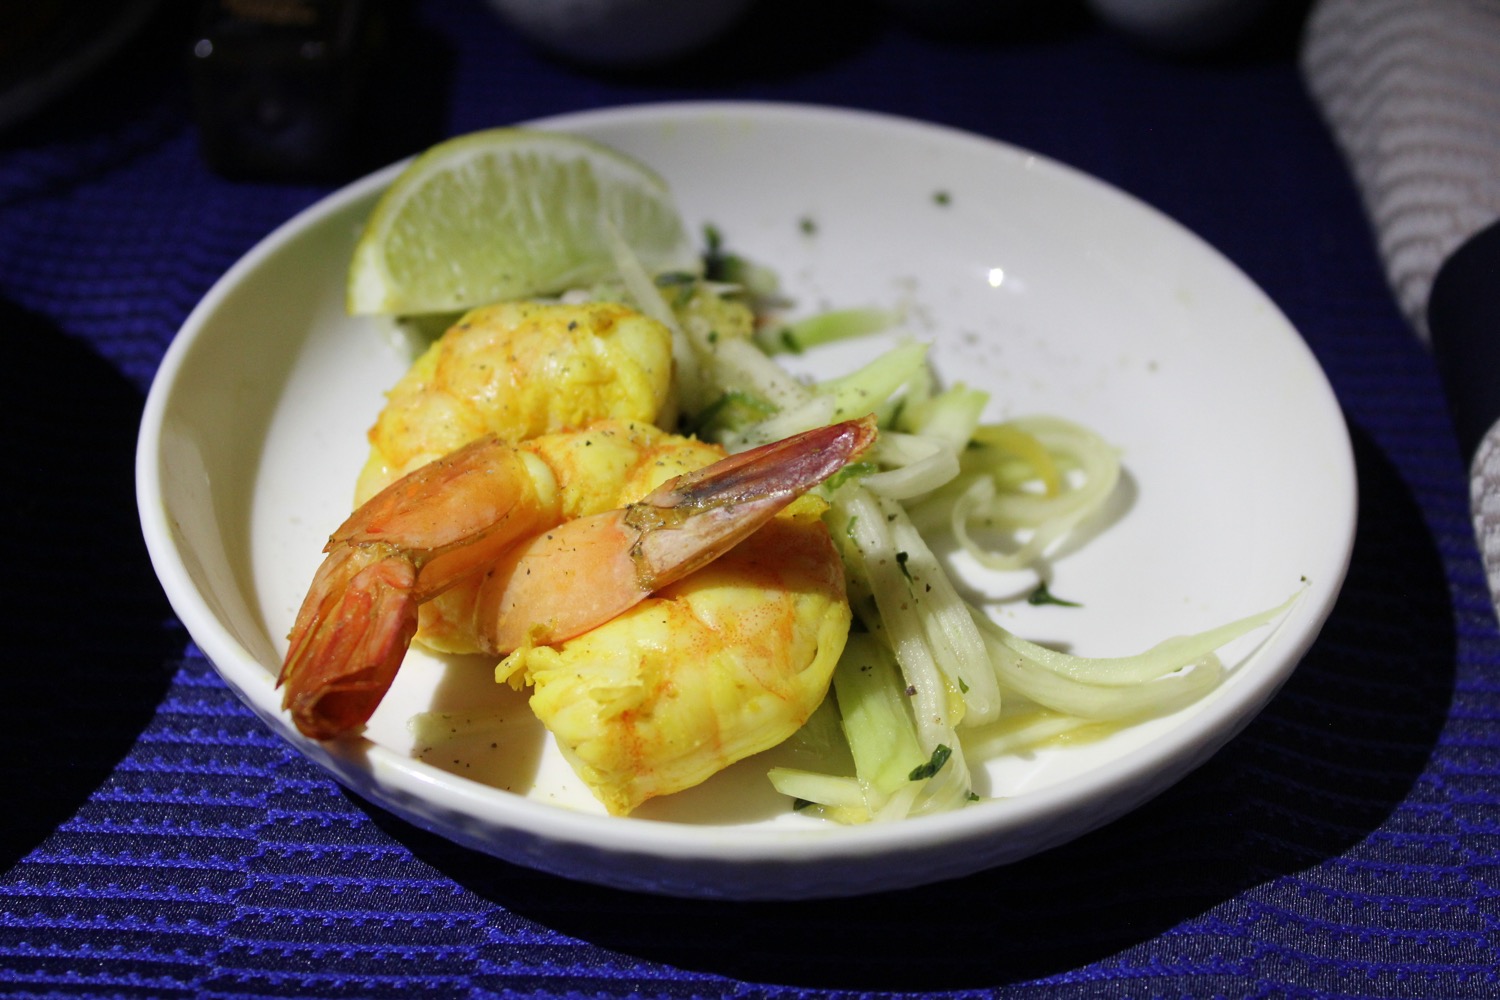 a plate of food with shrimp and lime wedges